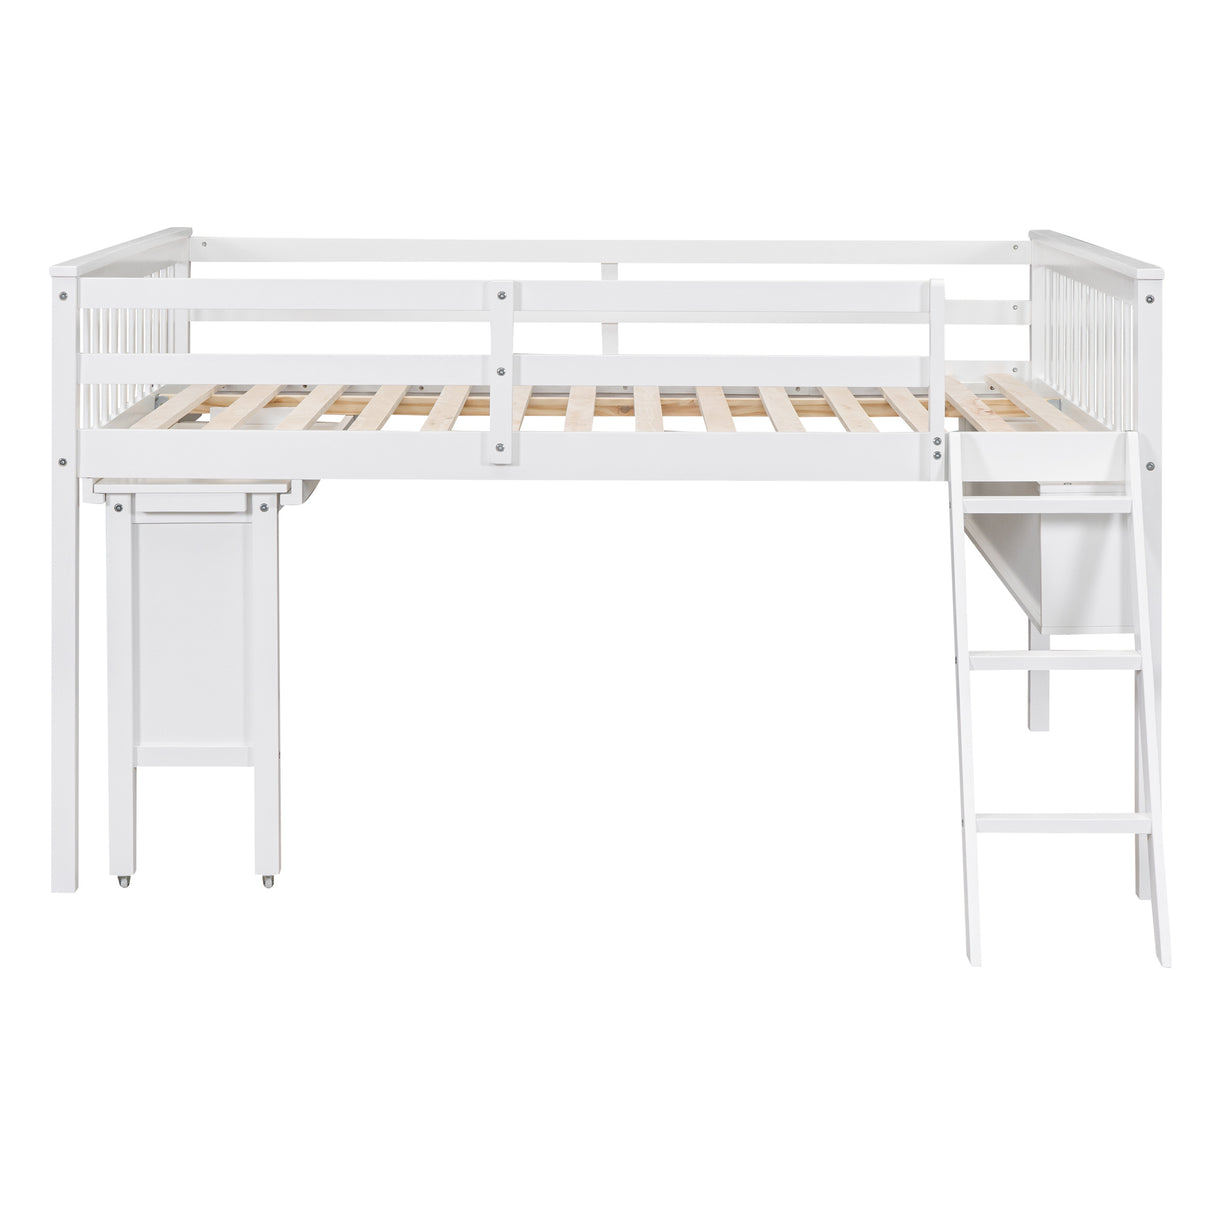 Full Size Loft Bed With Removable Desk and Cabinet, White - Home Elegance USA